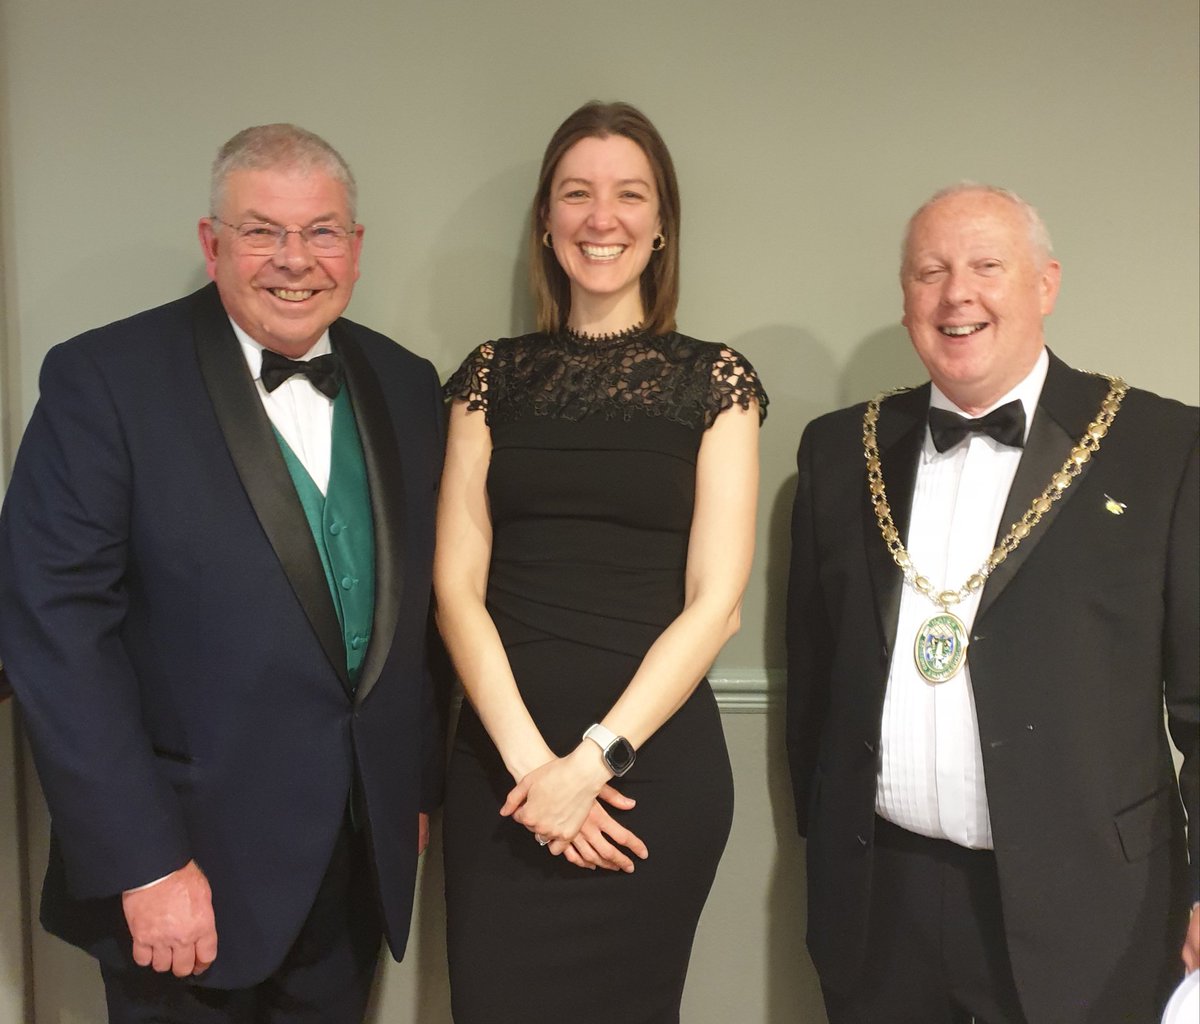 Honour and a pleasure to represent @Gwaac at the Mayor of Coleford's Charity Dinner. Cllr Nick Penny and the community have chosen  to continue support of their local air ambulance charity. #community #Gloucestershire  #Charity #Coleford